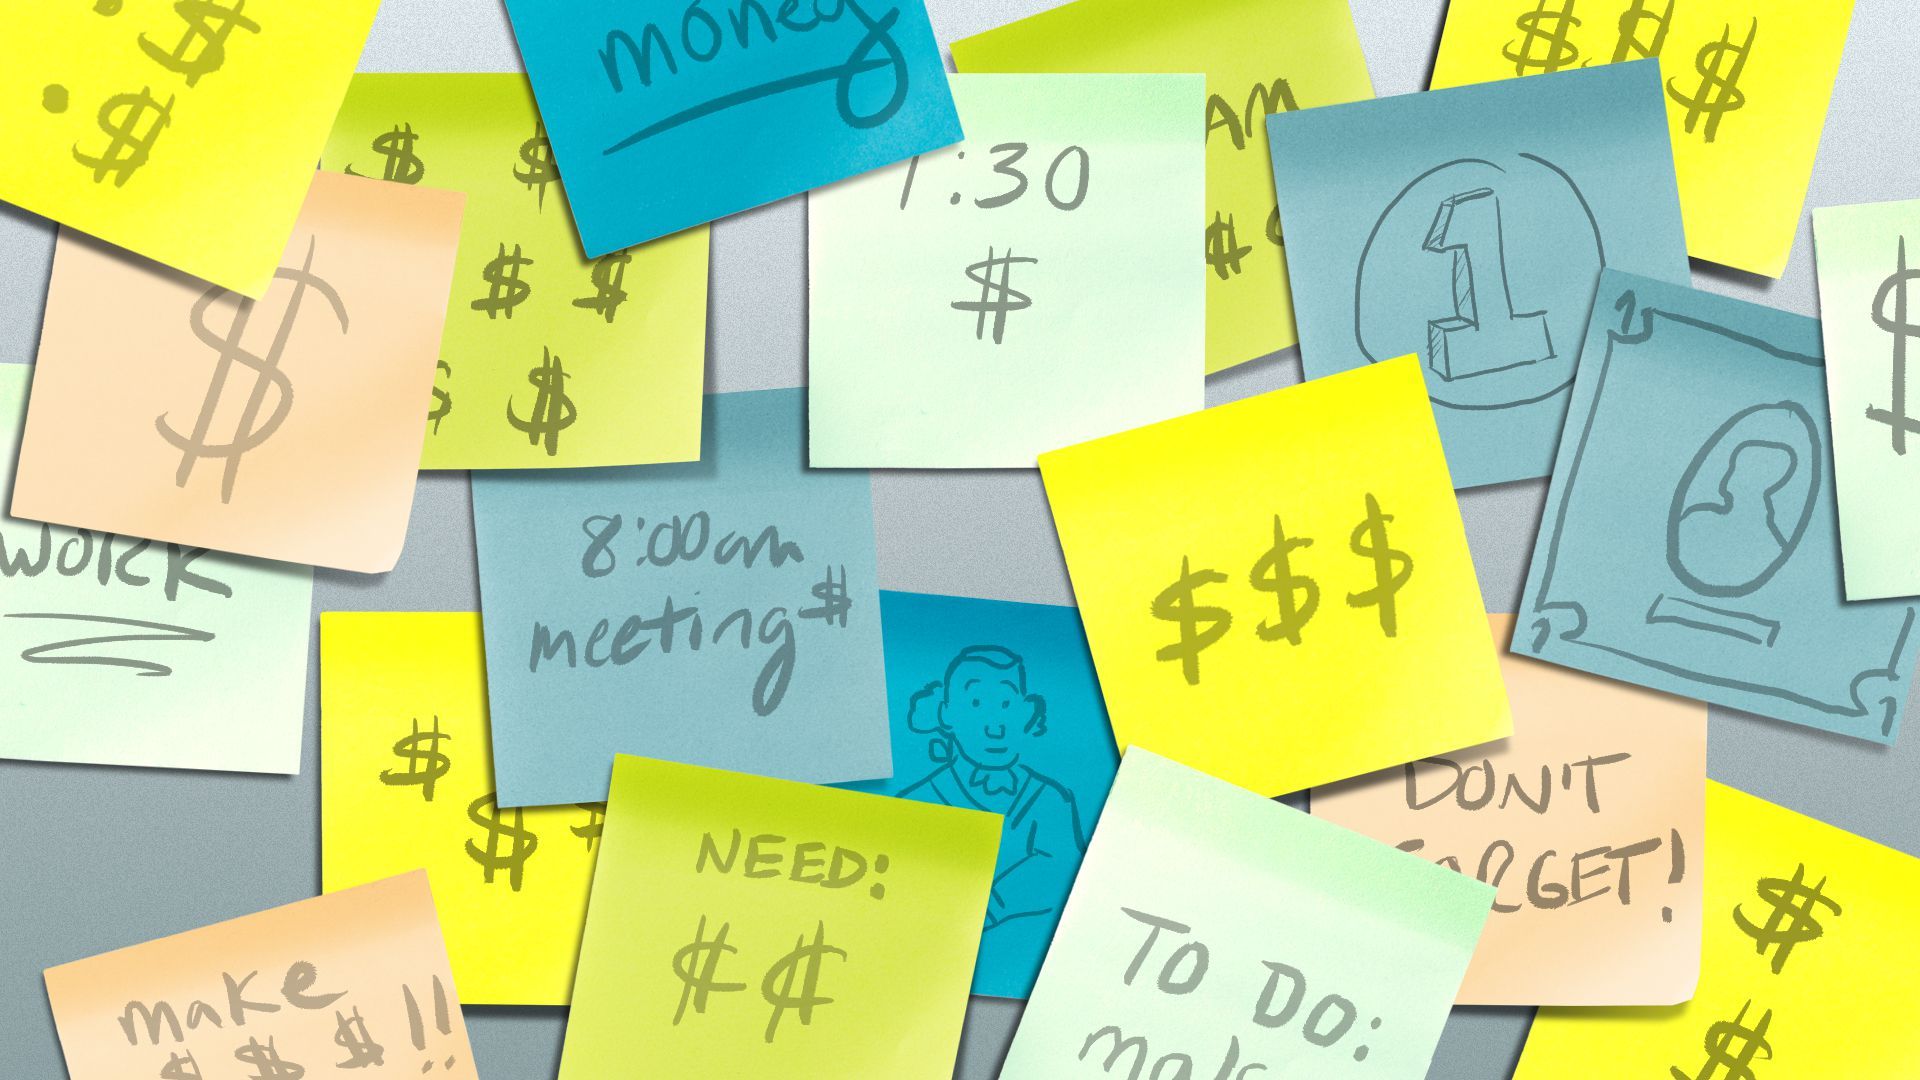 Illustration of a wall covered in post-it notes with money-related notes on them